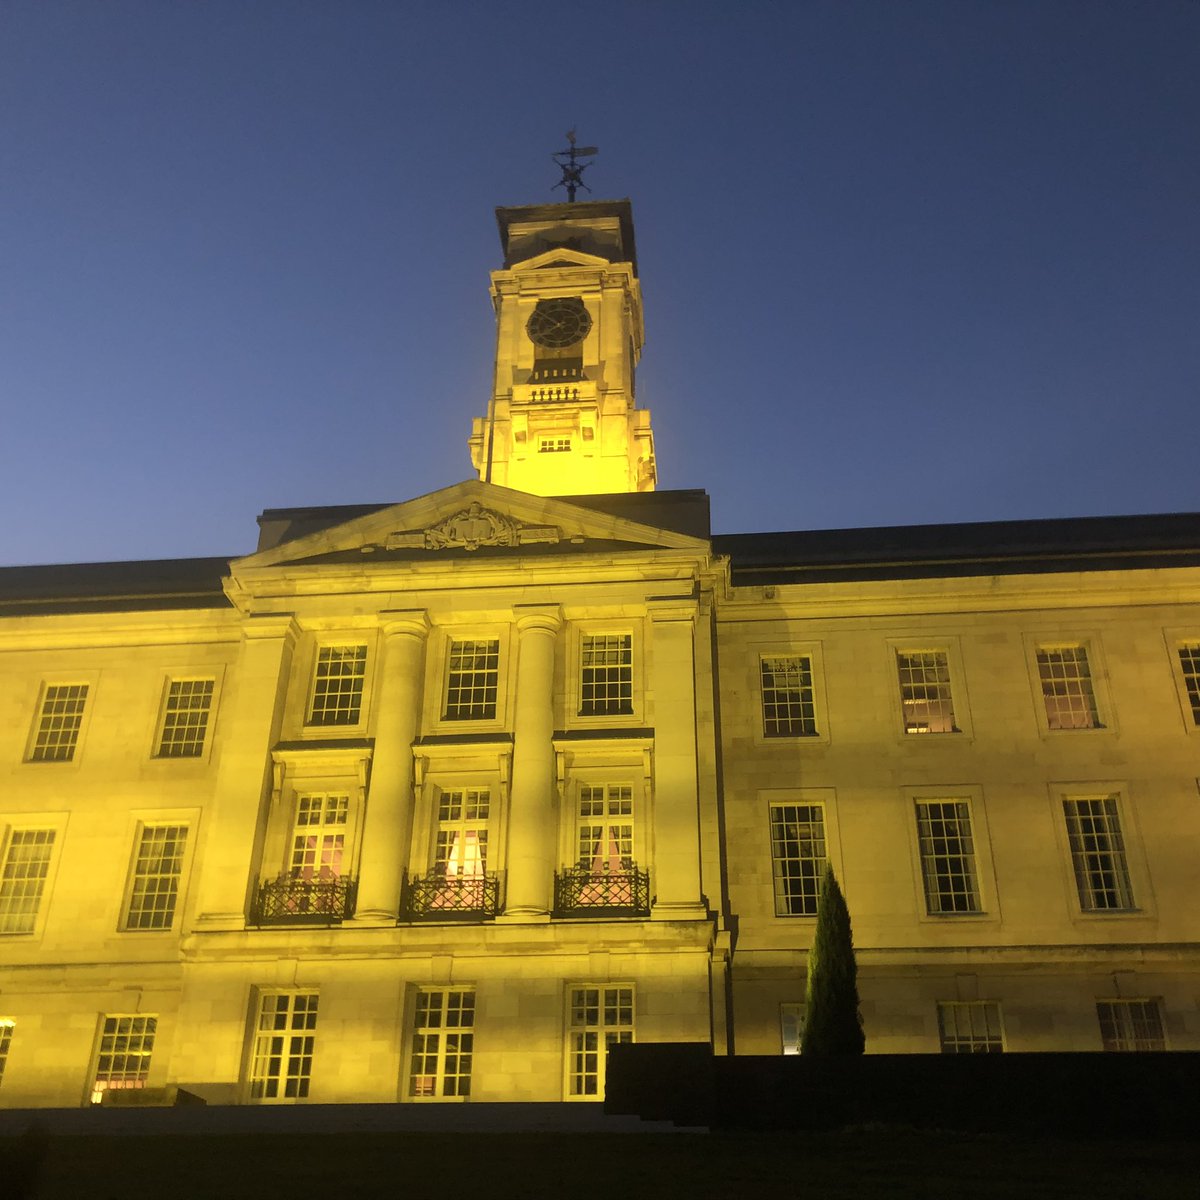 Trent Building looking stunning glowing gold tonight for the first time for #ChildhoodCancerAwareness #CCAM #WeAreUoN